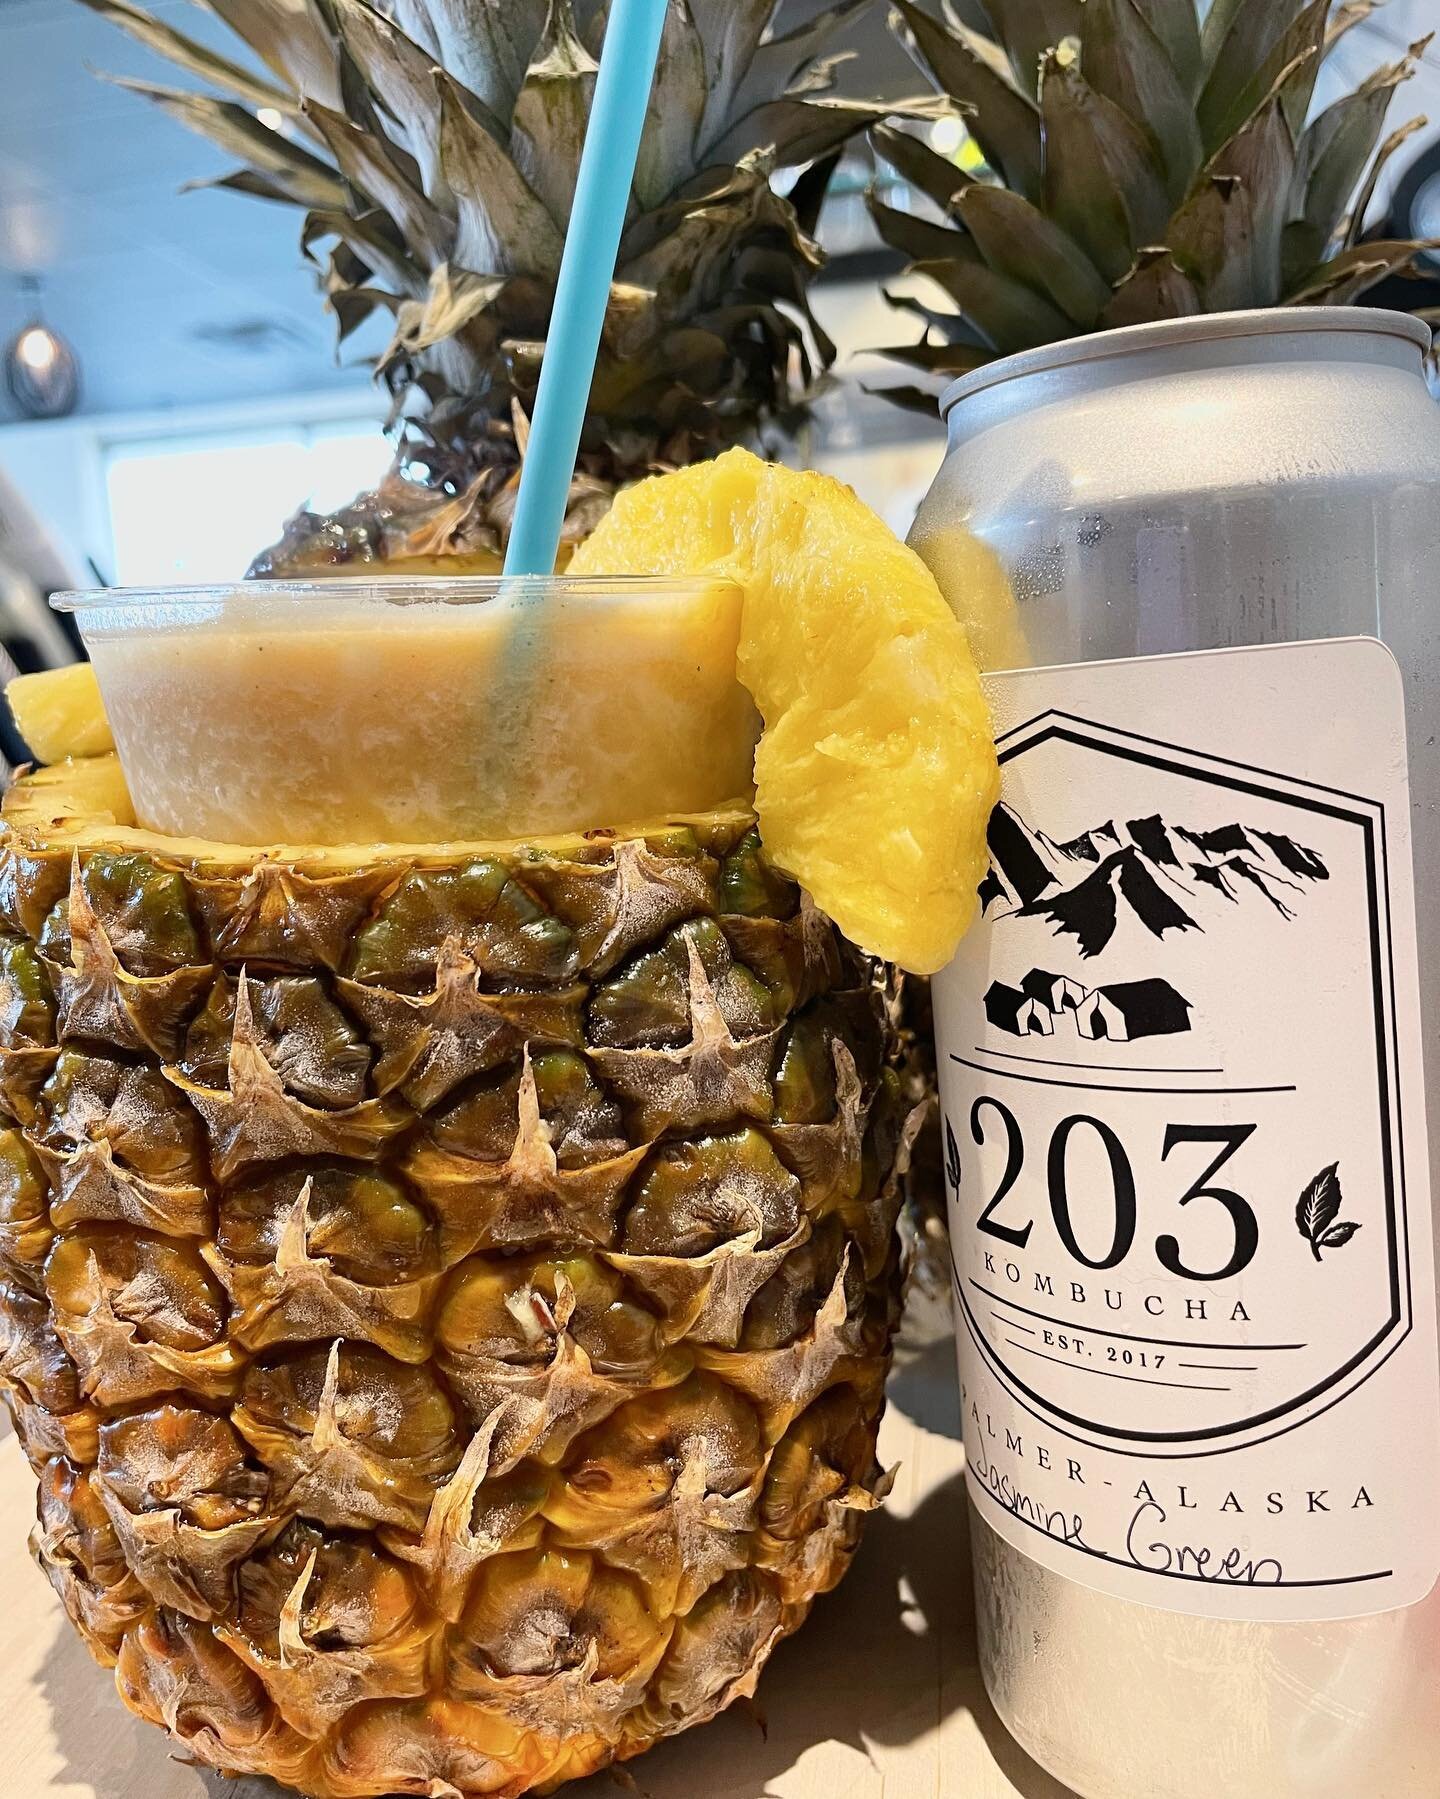 Summer may be winding down but we&rsquo;re keeping the keeping the flame alive with our homage to @203kombucha &lsquo;s delicious fresh-pressed juice. Introducing the Spicy Tropics 2.03 🔥 and a friendly reminder that we are now open on Mondays! Come